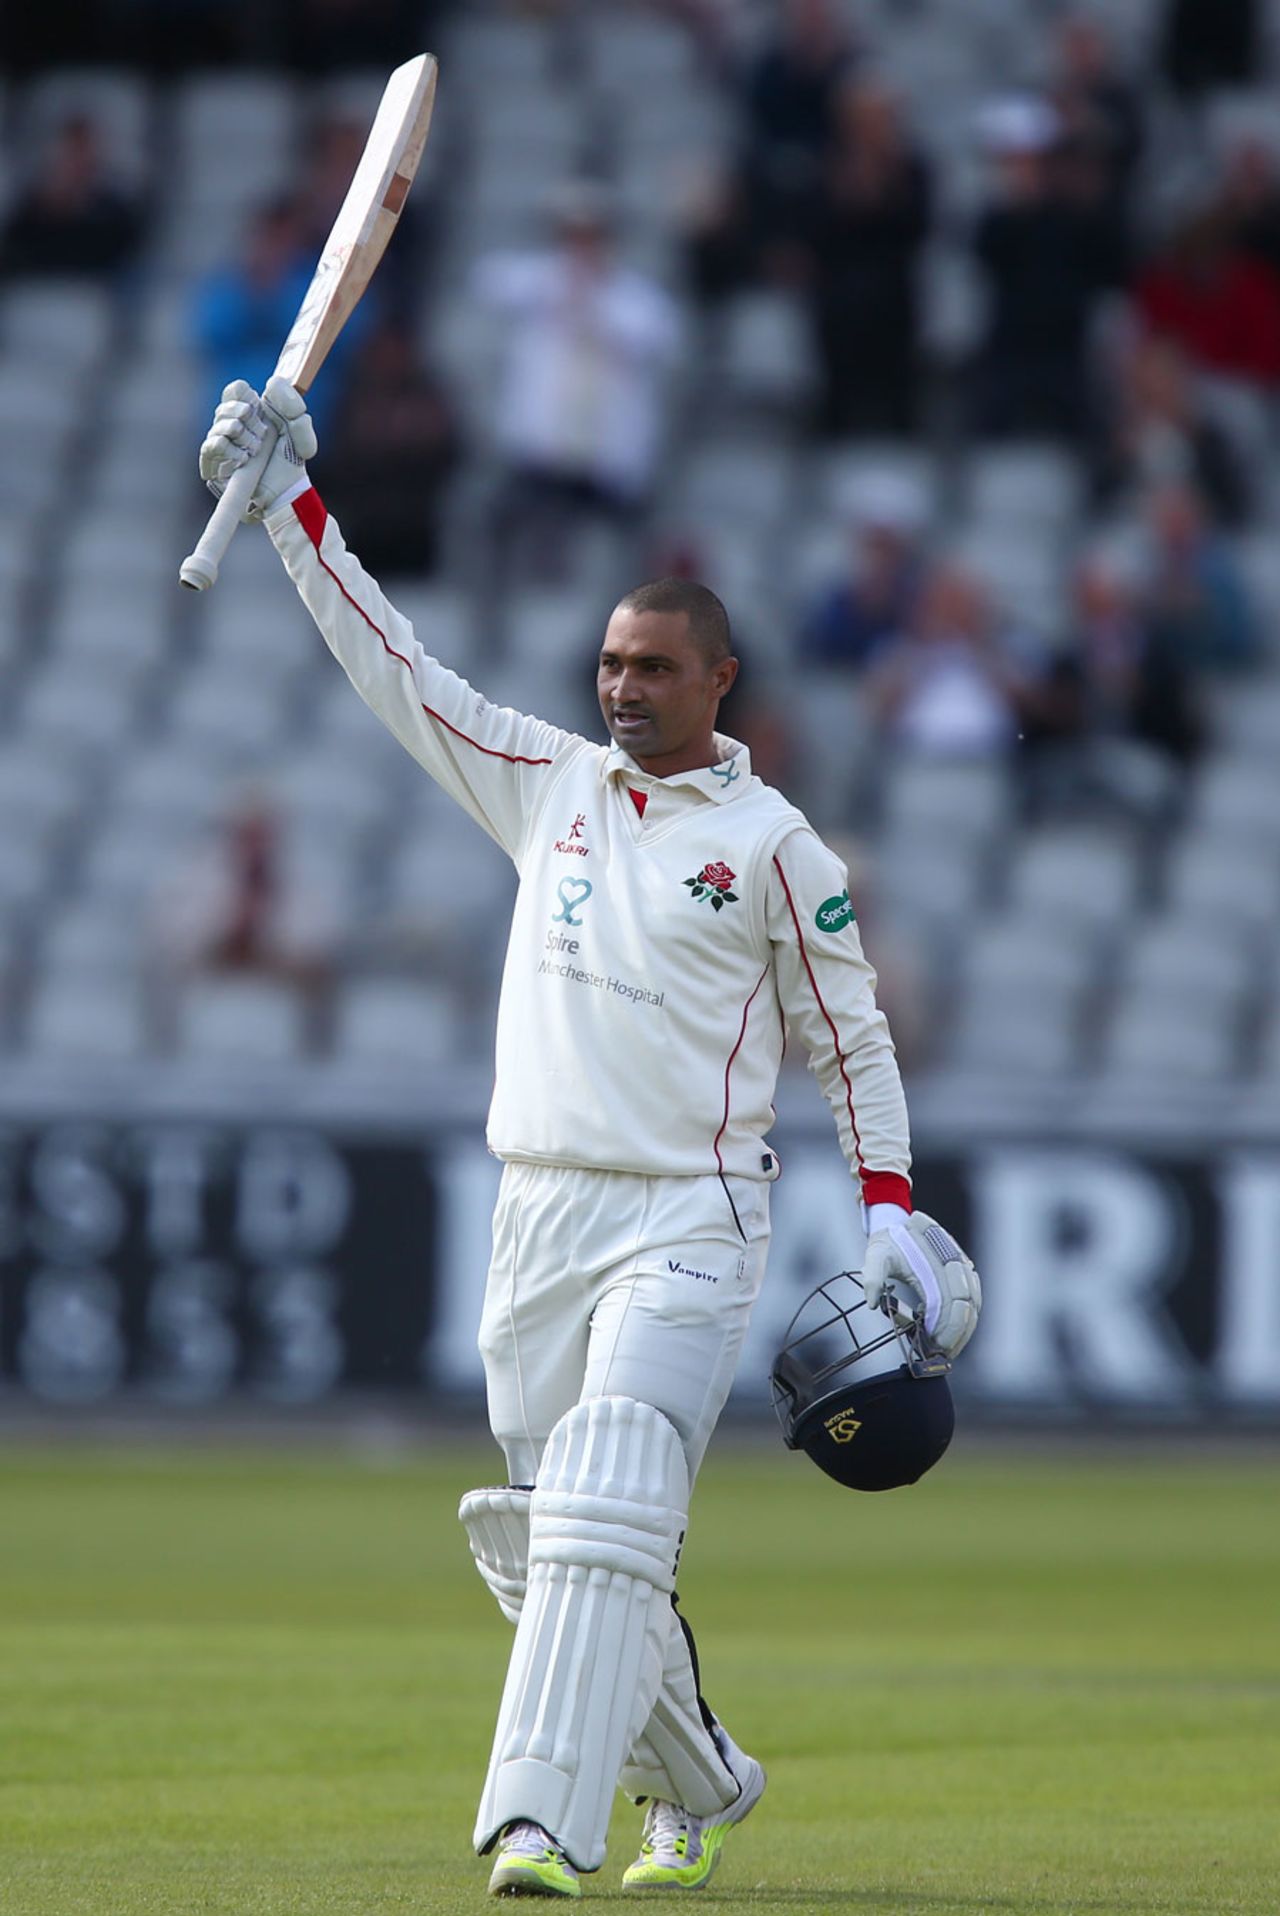 Alviro Petersen reached his first hundred of the summer, Lancashire v Surrey, County Championship, Division One, Old Trafford, 2nd day, May 23, 3016